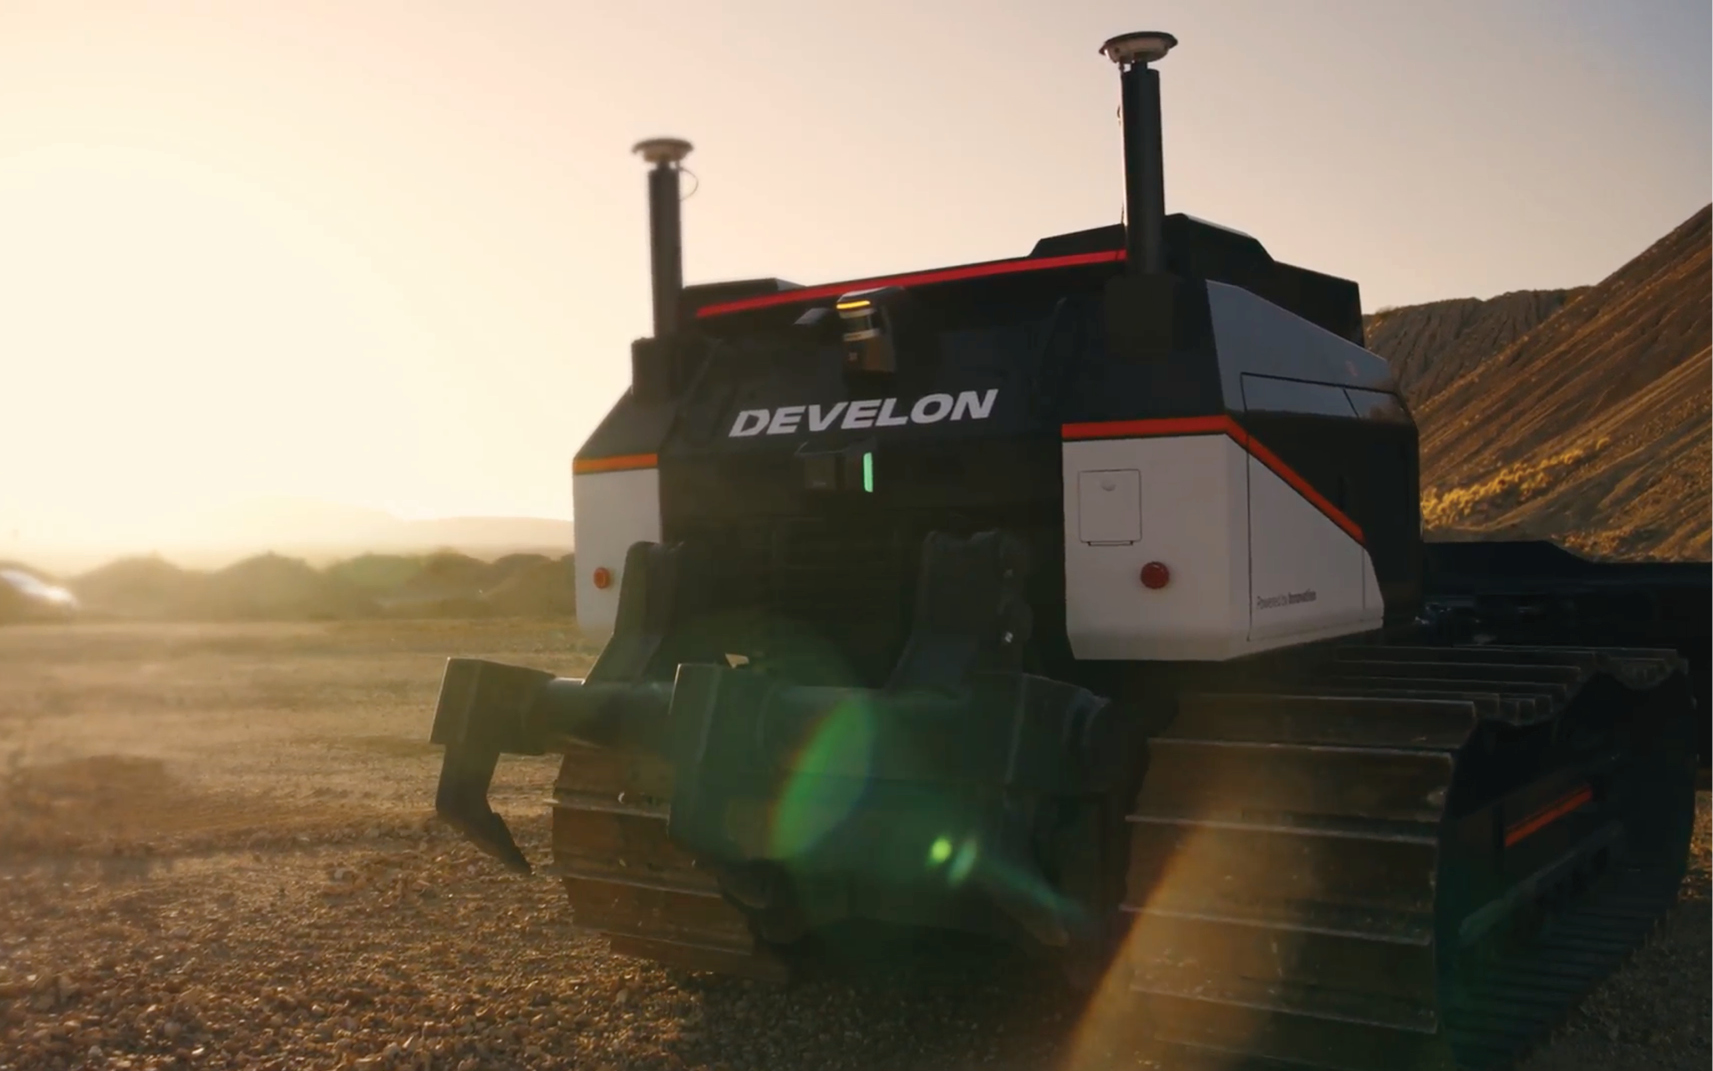 A video created during CONEXPO 2023 shows the latest version of Concept-X2 and autonomous construction equipment from DEVELON.